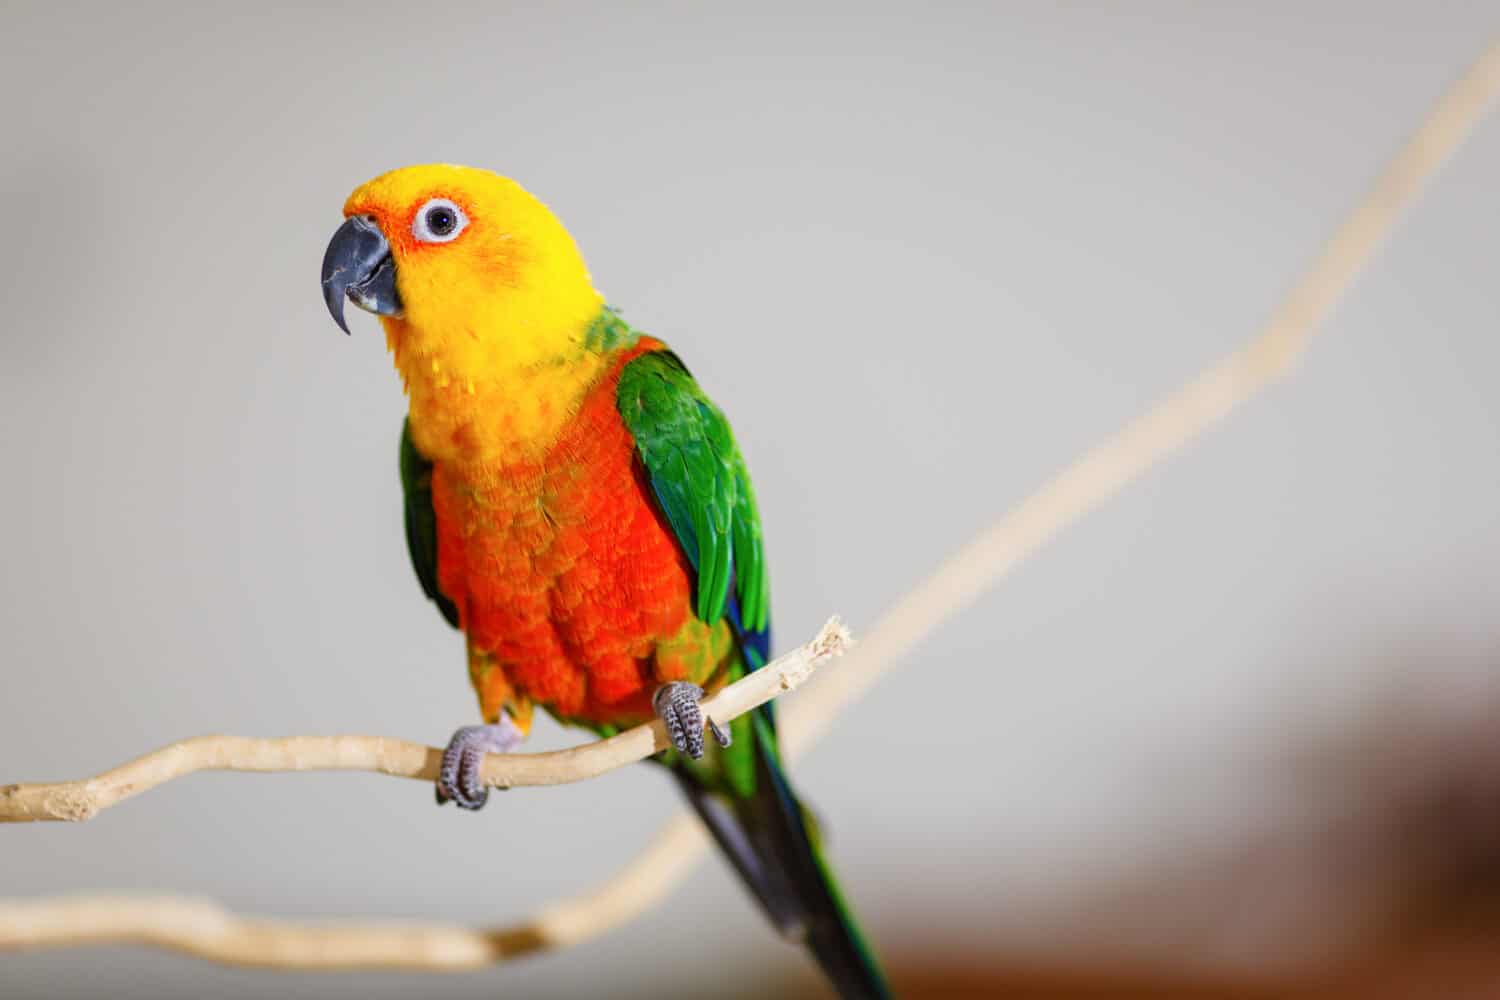 A colorful jenday conure sitting on a tree branch.